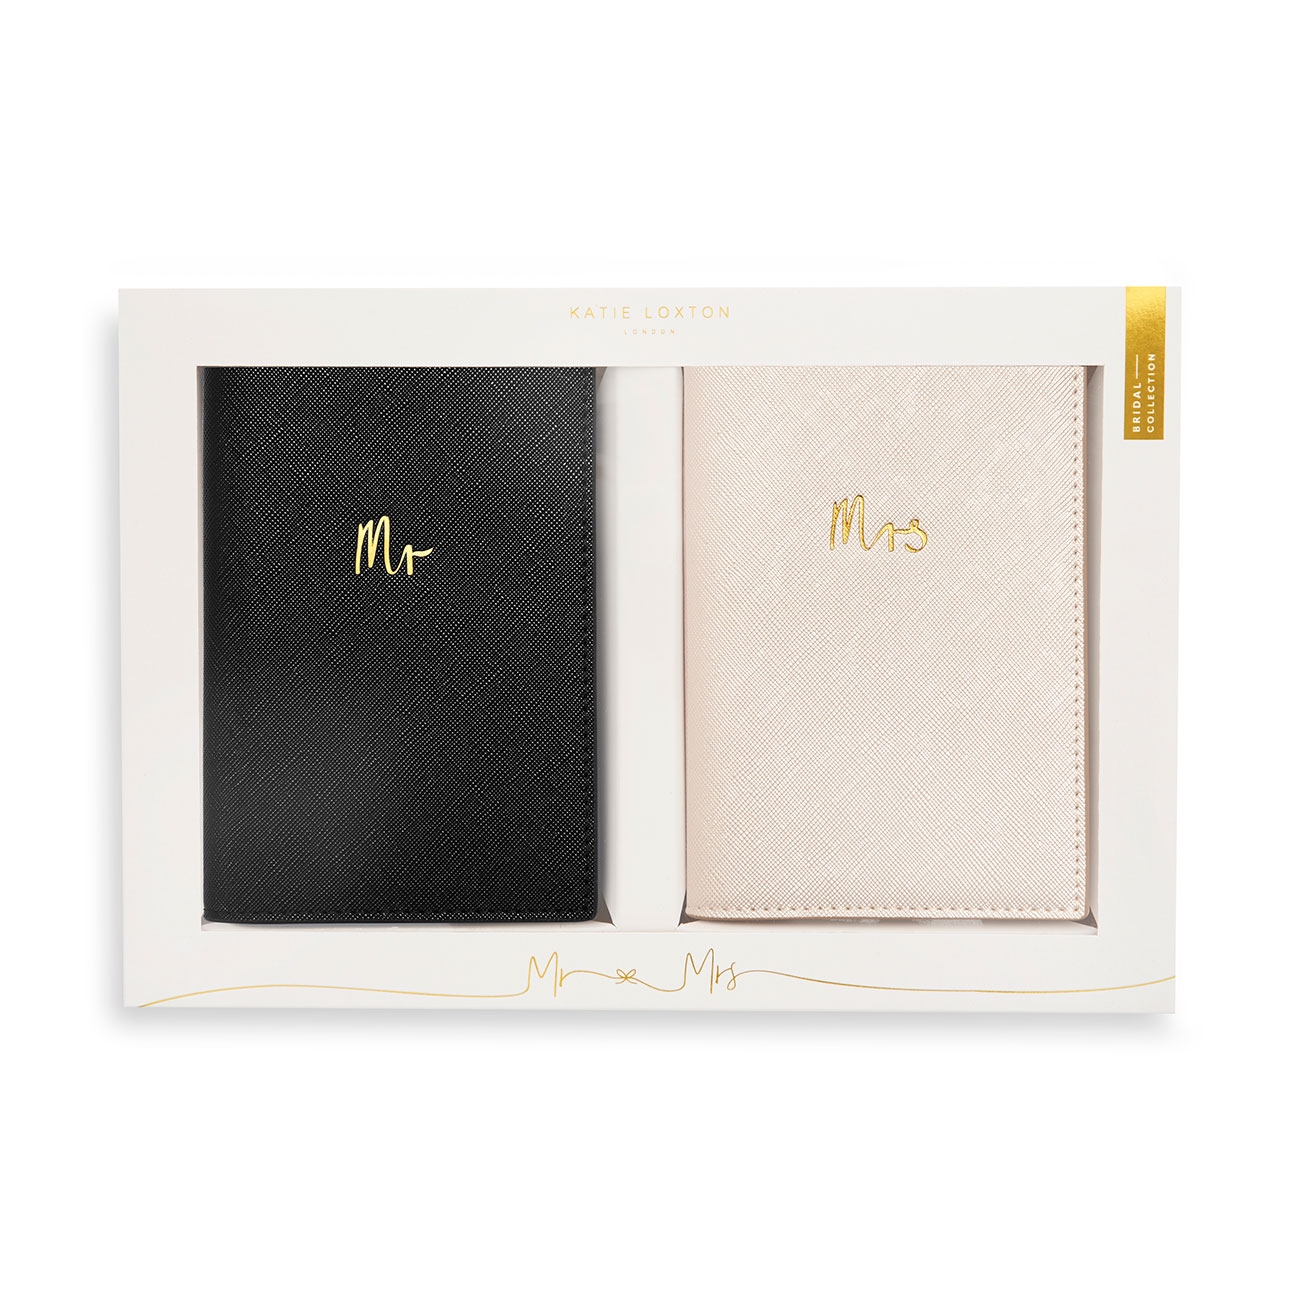 Katie Loxton Bridal Passport Cover Gift Set – Mr And Mrs – Box